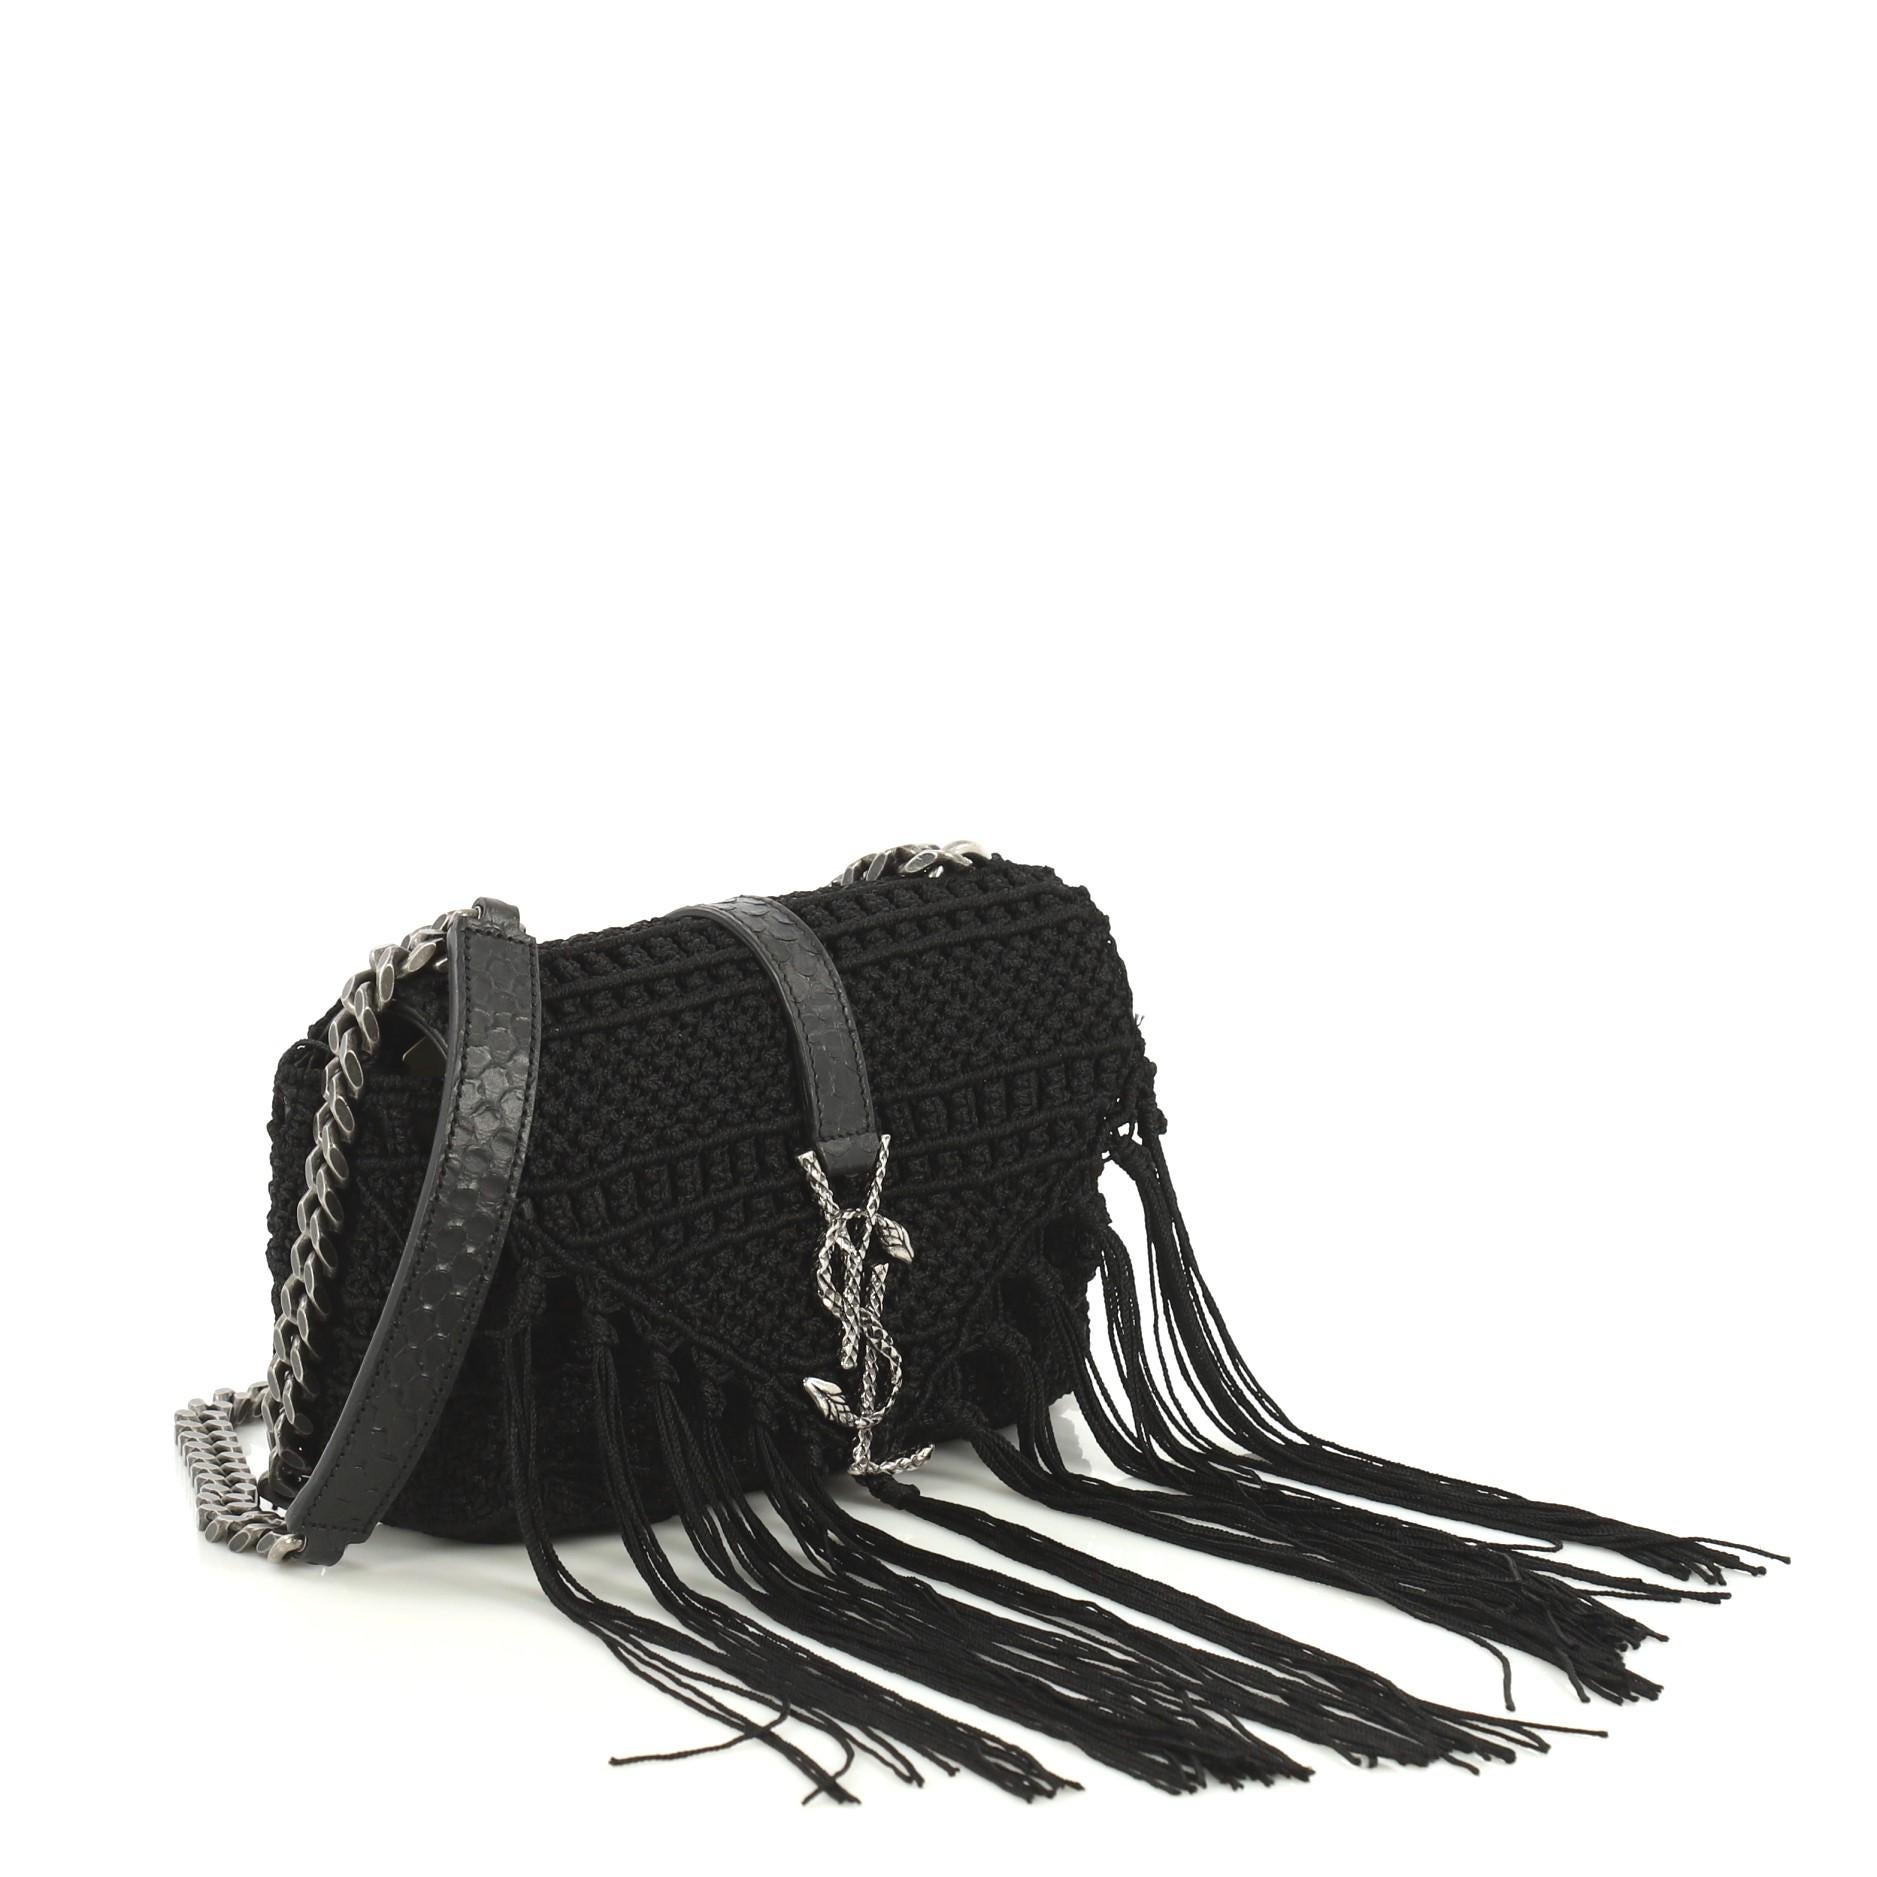 This Saint Laurent Classic Monogram Crossbody Bag Crochet Over Leather Baby, crafted from black crochet over leather, features chain link strap with leather shoulder pad, cascading fabric fringes and aged silver-tone hardware. Its hidden magnetic